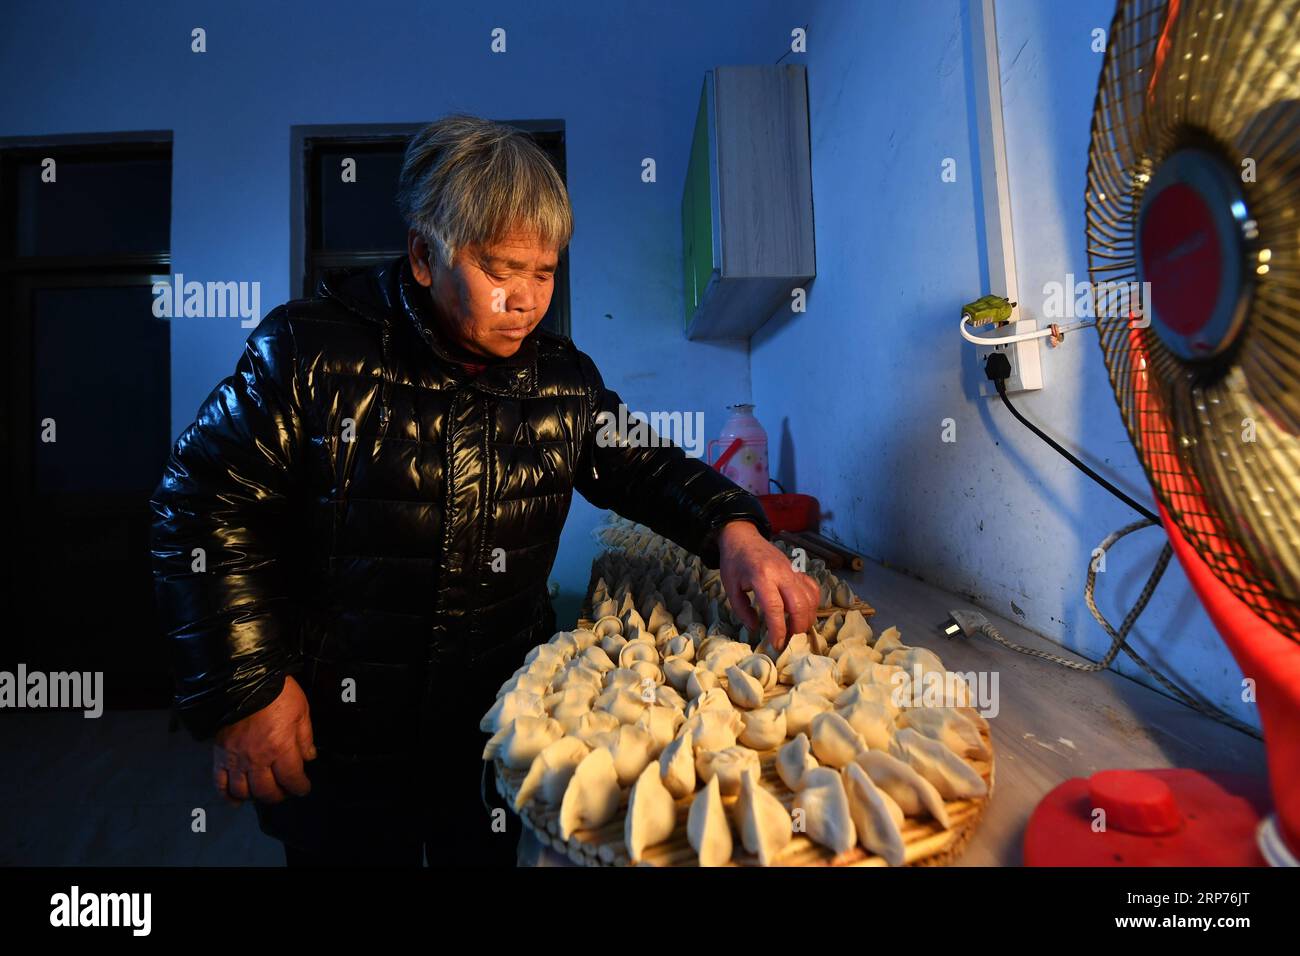 (190129) -- WENXI COUNTY, Jan. 29, 2019 (Xinhua) -- Bai Gaijiao, a resident of the Home of Happiness poverty-alleviation settlement, arranges freshly-made dumplings in Zhangcailing Village of Yangyu Township, Wenxi County, north China s Shanxi Province, Jan. 28, 2019. For generations, residents of Zhangcailing Village barely scraped a living as a result of geographical isolation, poor infrastructure and lack of supporting industries. To help pull villagers out of poverty, the government increased its financial support encouraging agriculture and husbandry suited to the local conditions. By pla Stock Photo